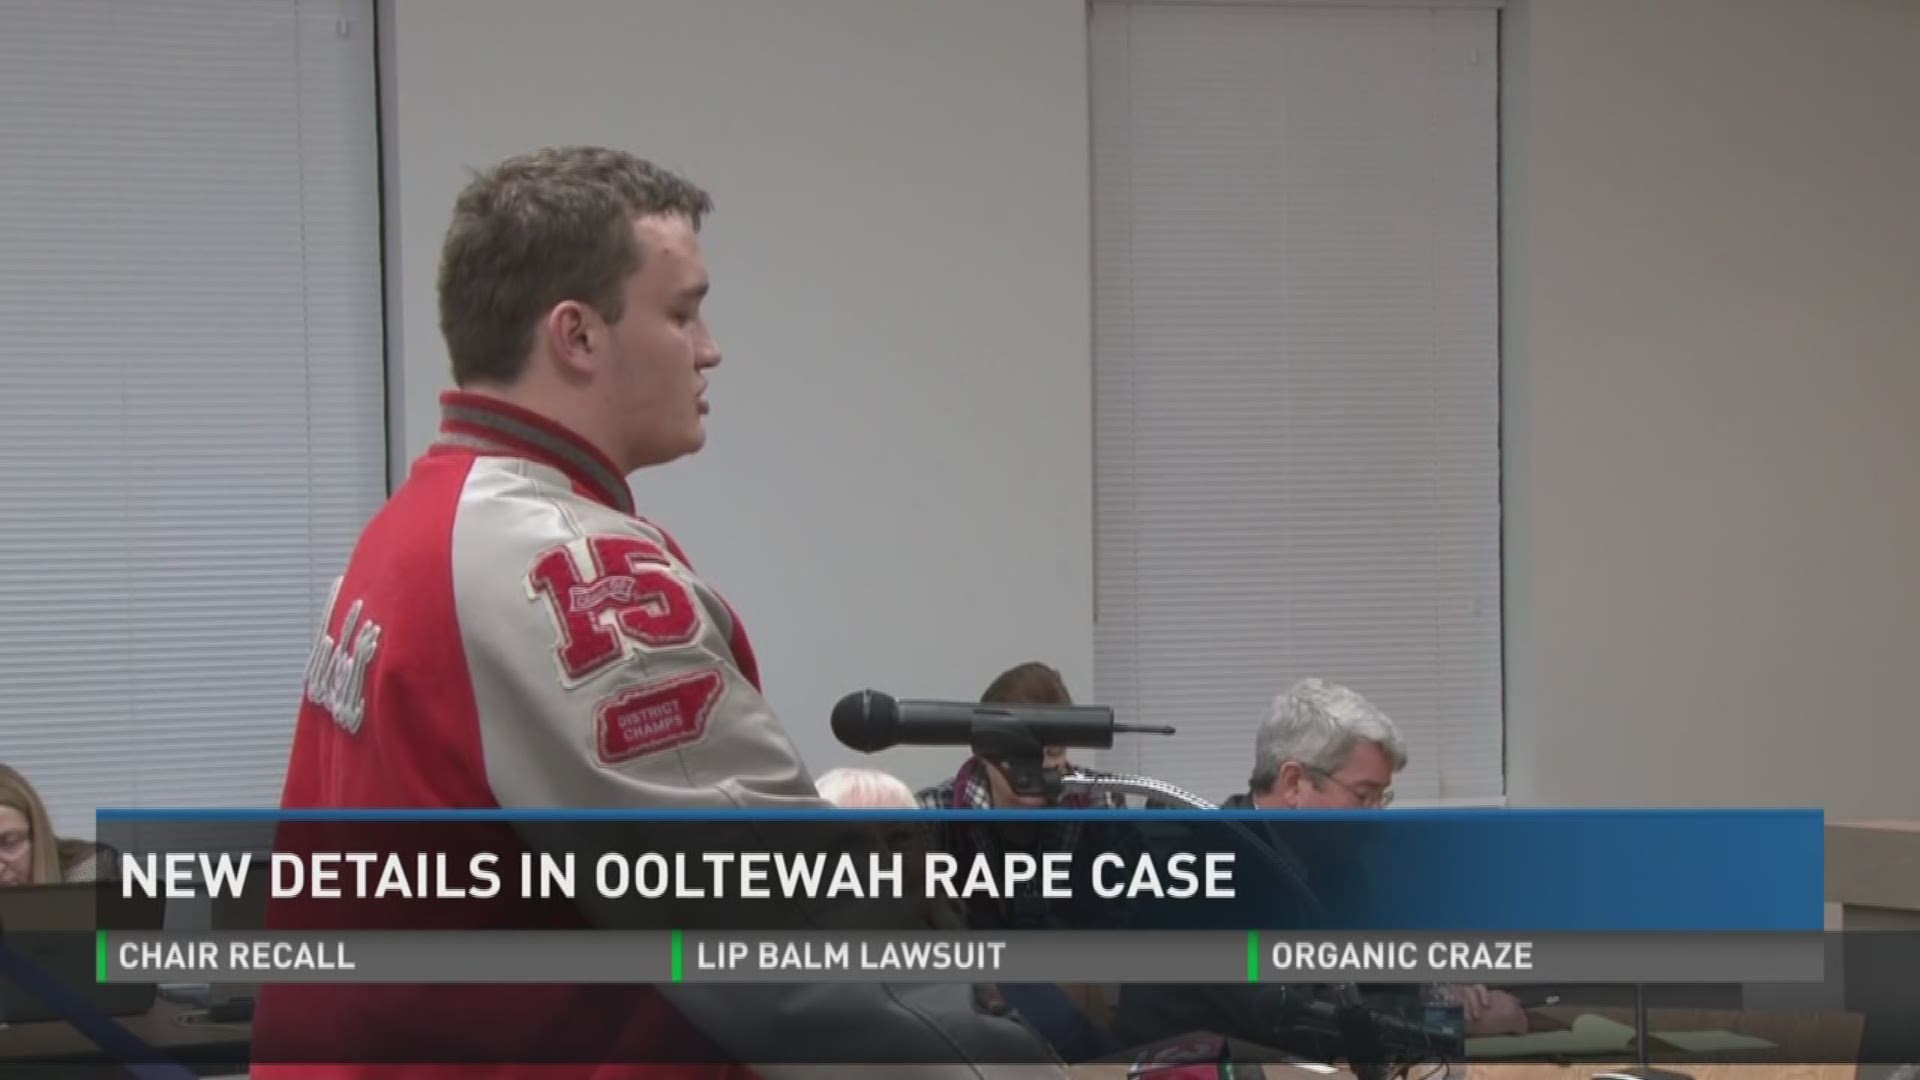 Thursday, we learned four new key pieces of information in the Ootlewah basketball rape investigation.